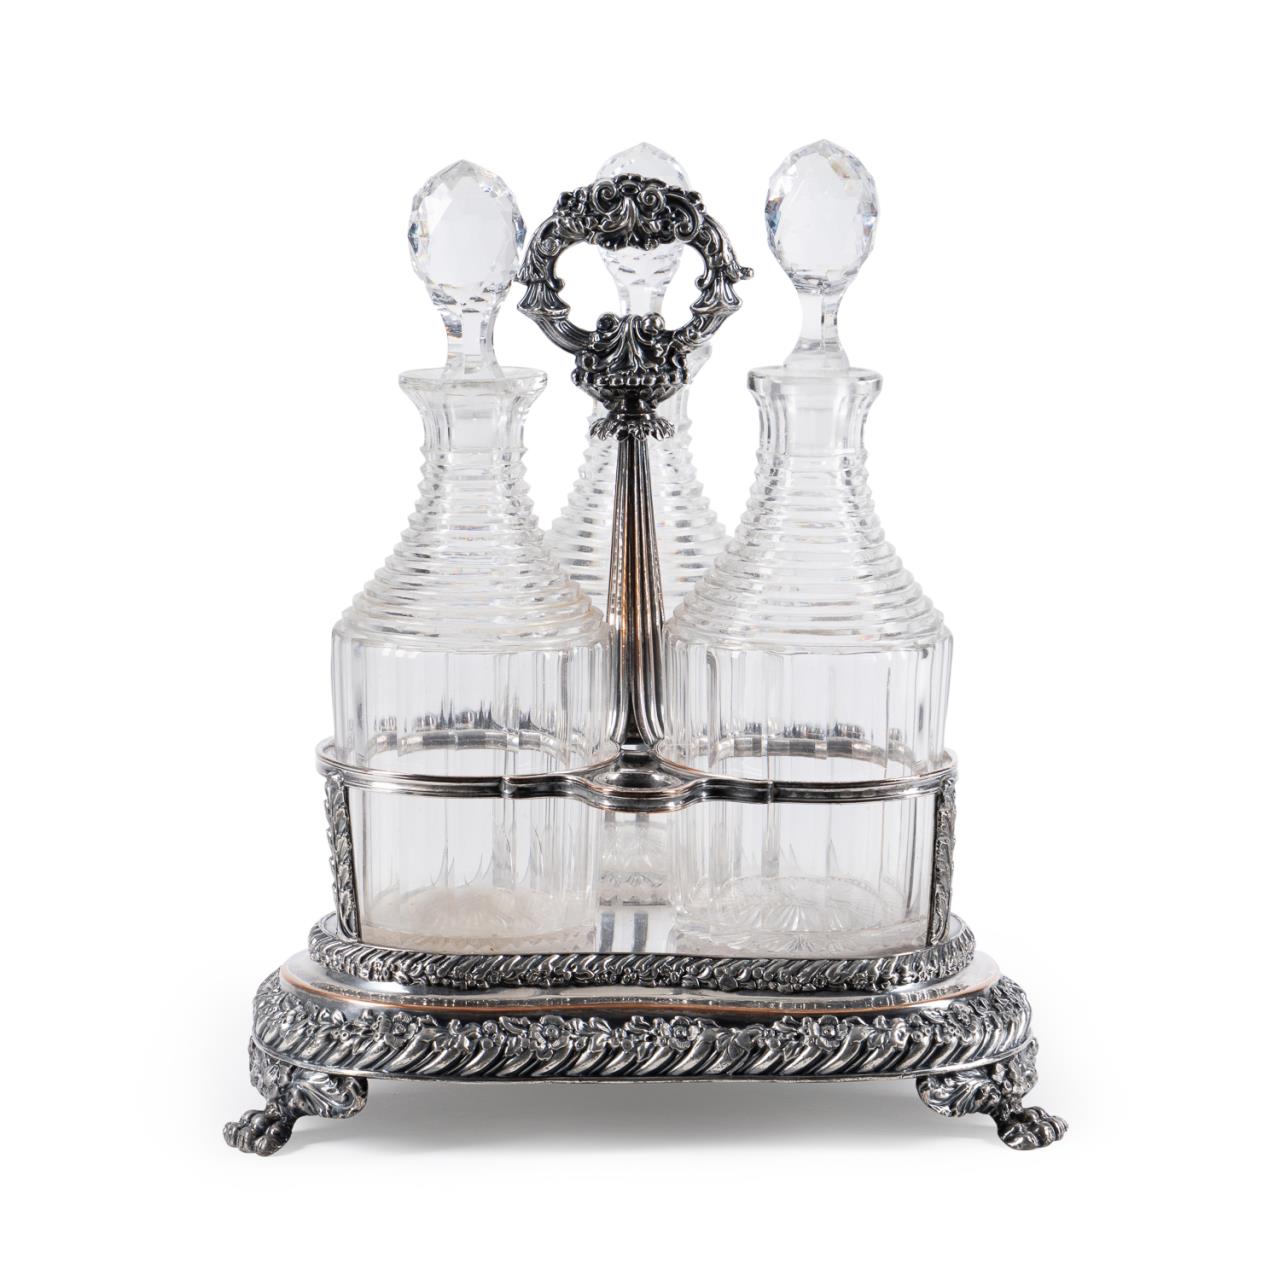 OLD SHEFFIELD PLATE THREE-BOTTLE DECANTER